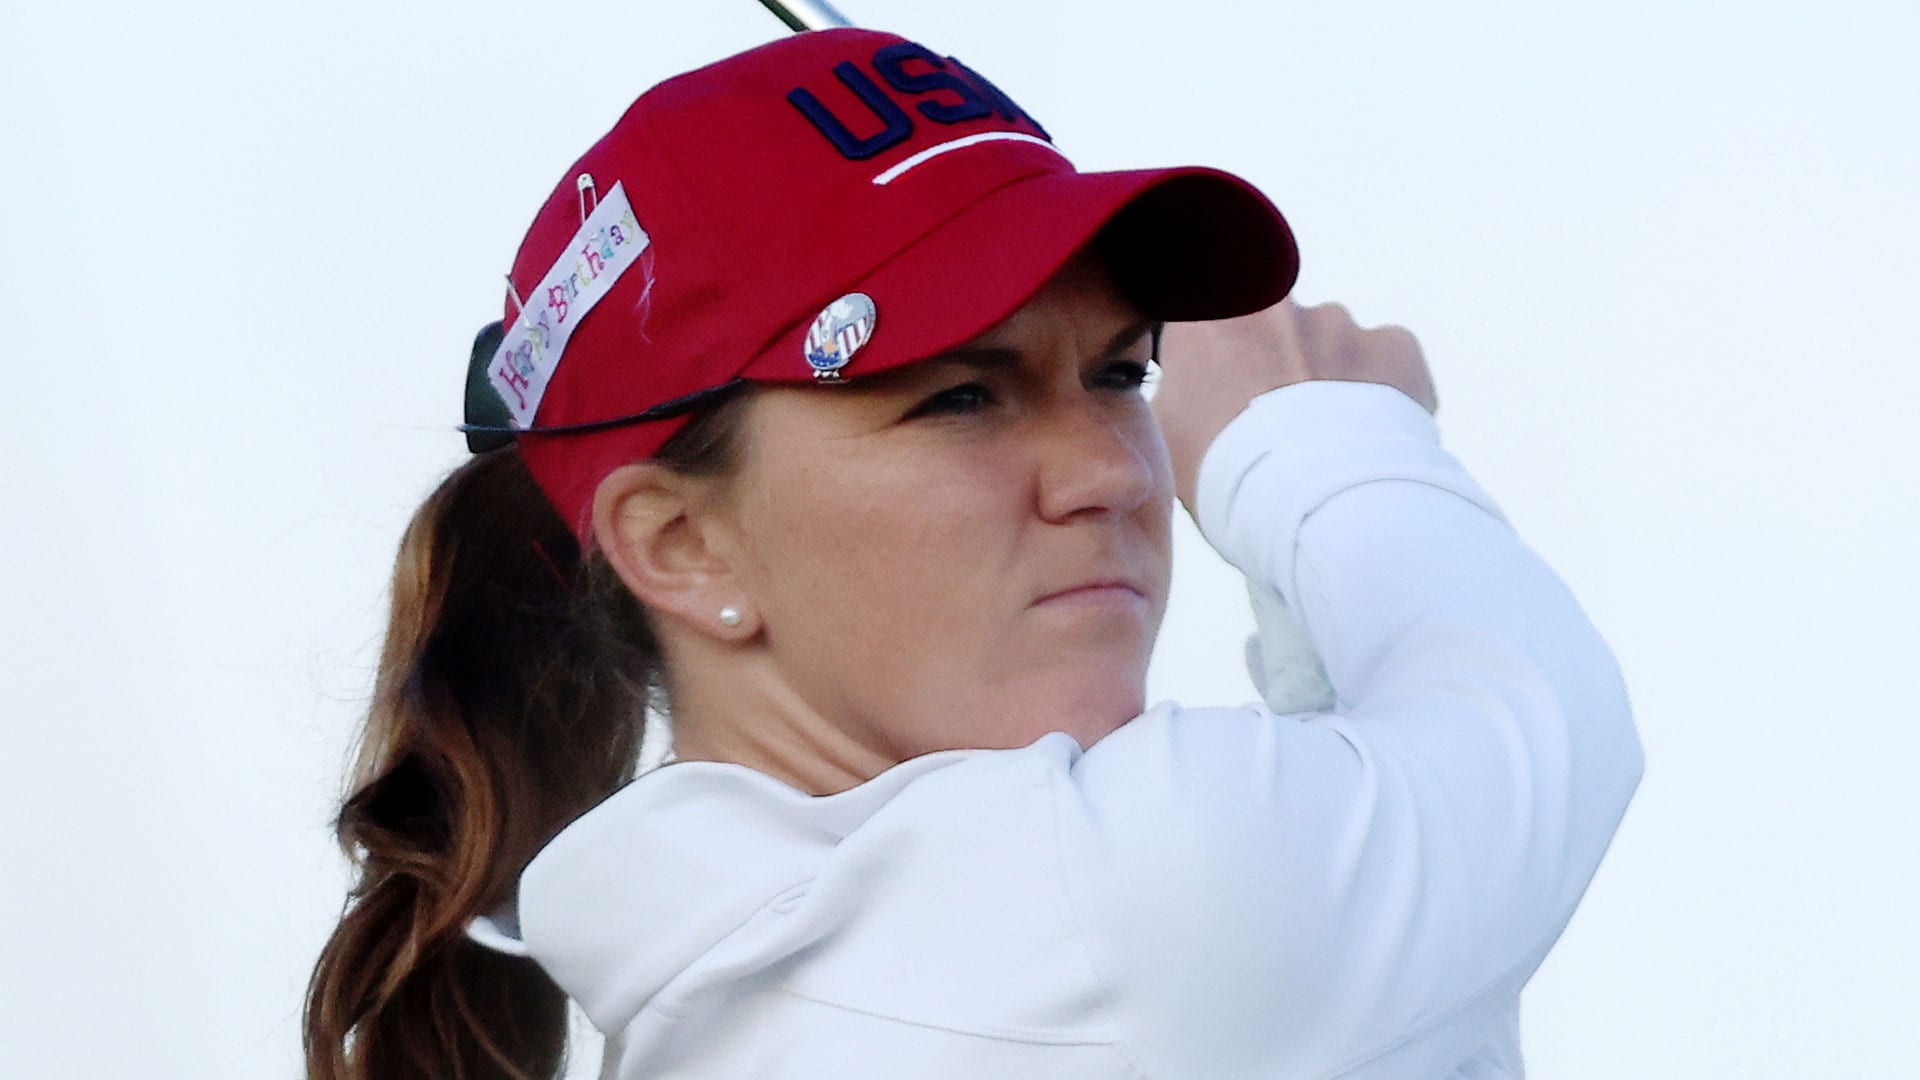 U.S. Solheim Cup team paying tribute to Jane Park’s ill daughter on birthday